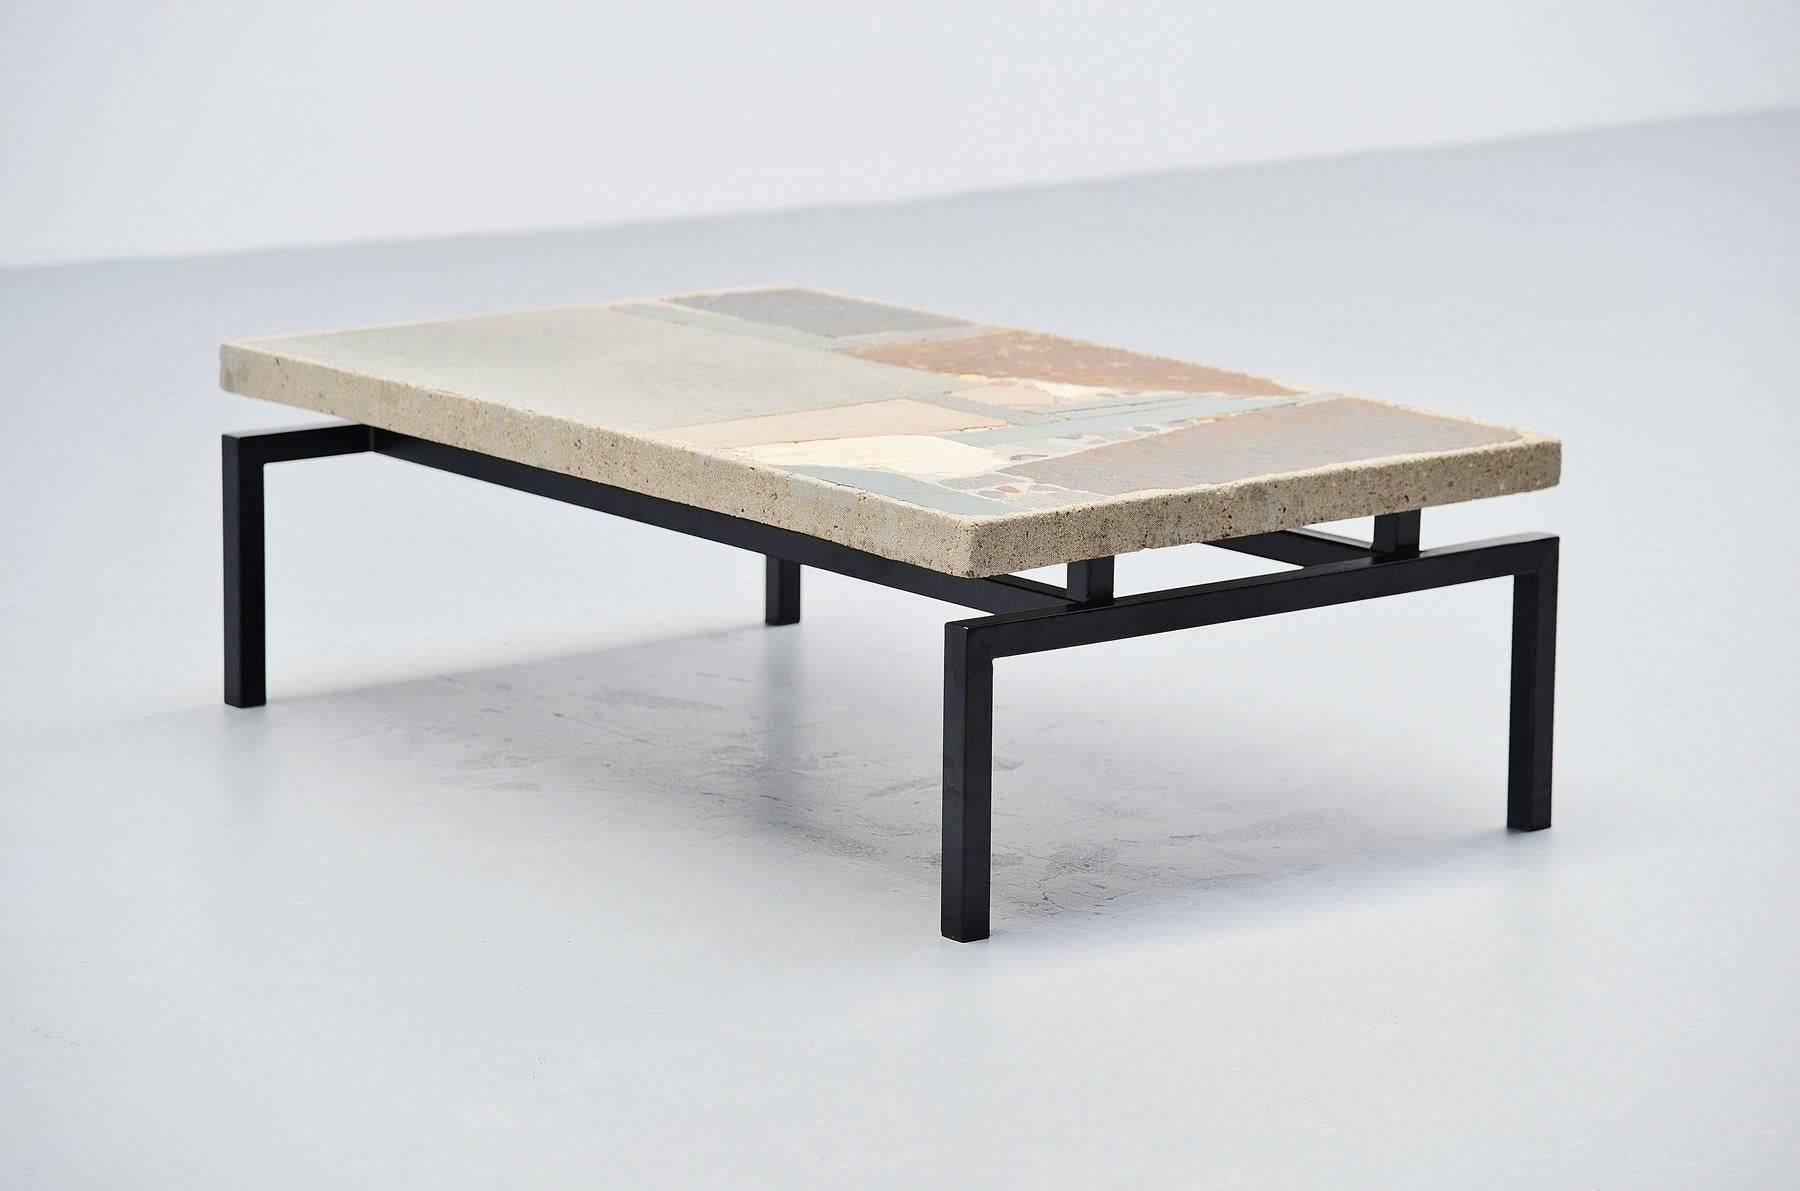 Very nice sober and early example of a Paul Kingma coffee table. Paul Kingma was well known for his architectural tables that pay a tribute to the riches of nature by traveling extensively in search of rare materials, whether raw or industrially